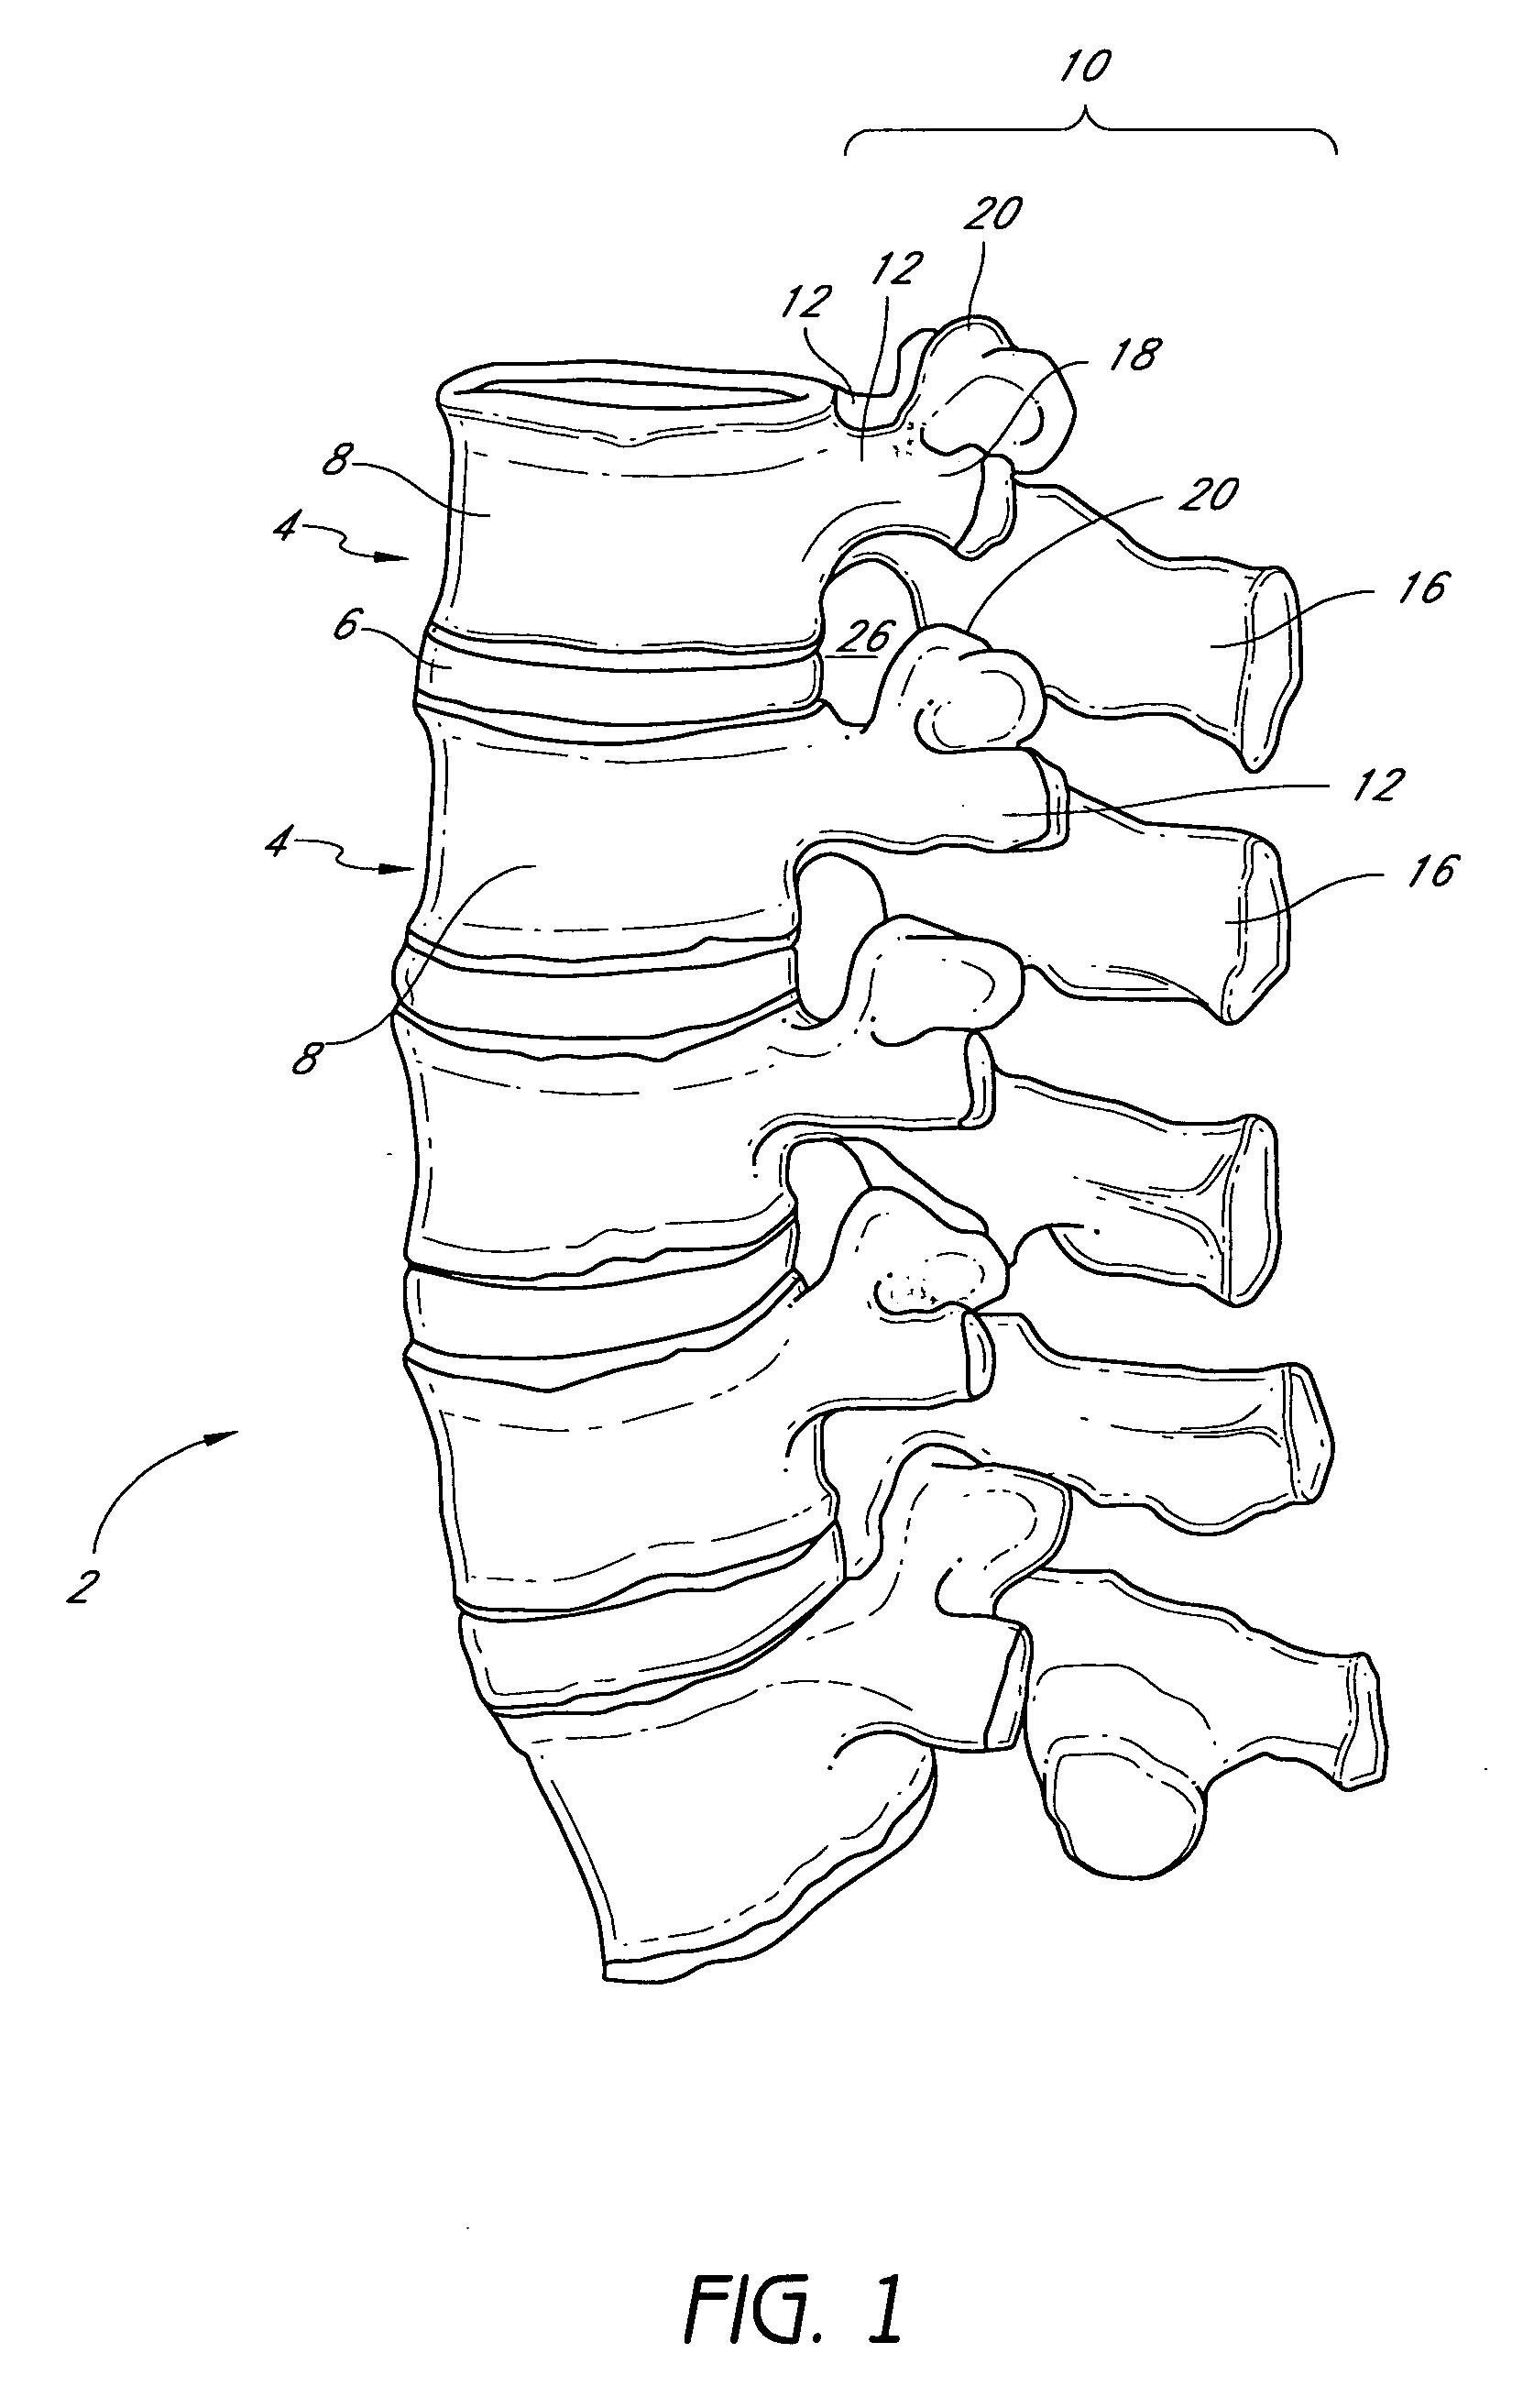 System and method for protecting neurovascular structures